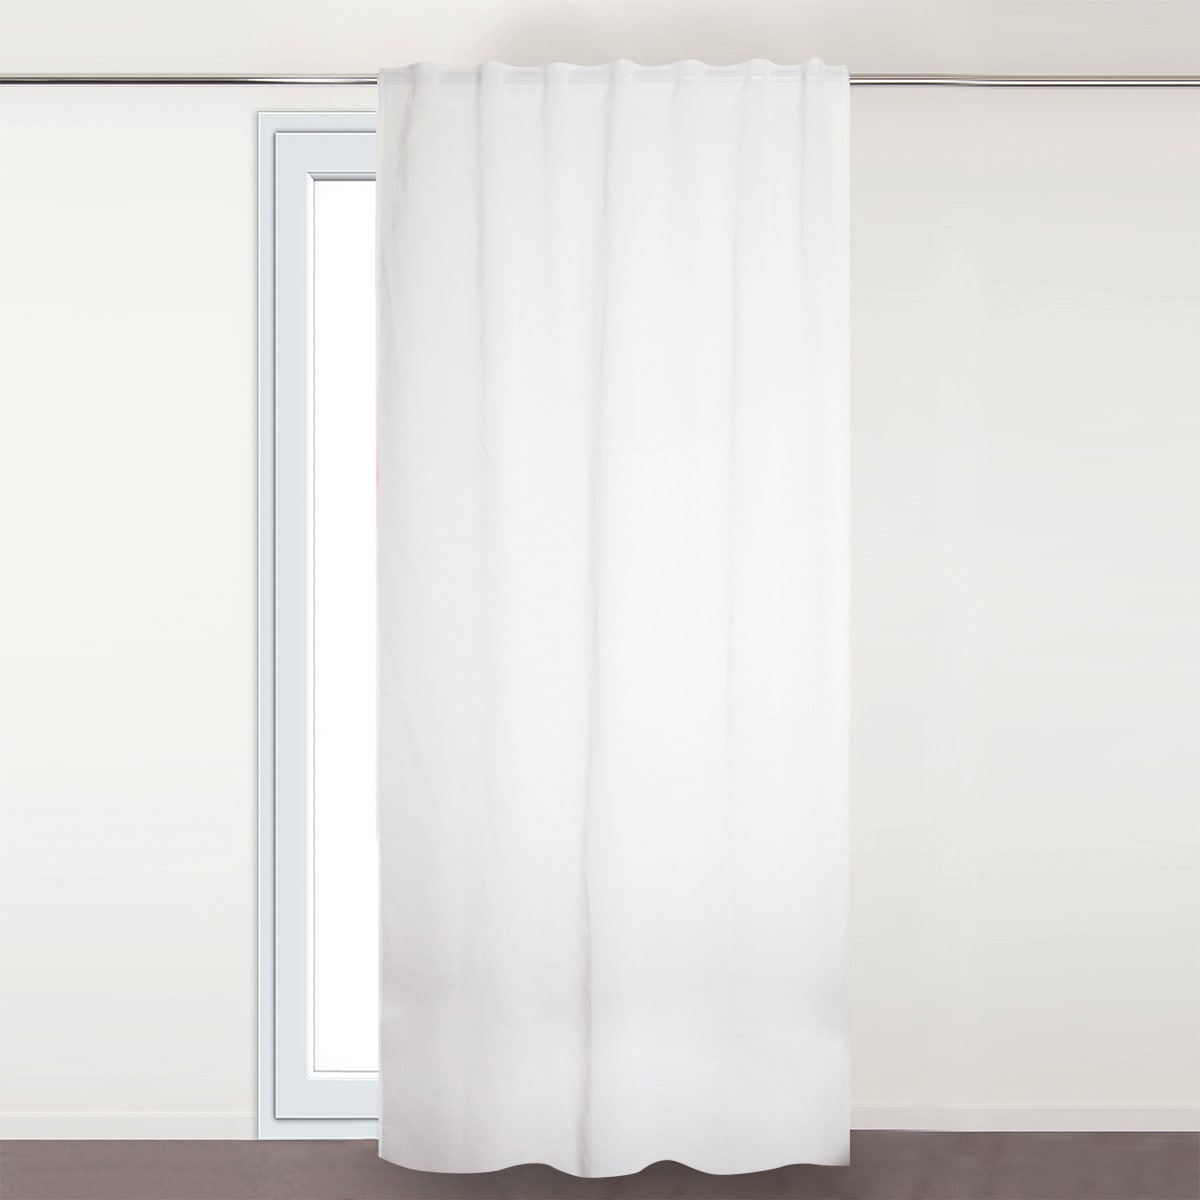 ACCADIA WHITE FILTER CURTAIN 140X280 WEBBING AND CONCEALED HANGING LOOP - best price from Maltashopper.com BR480011081